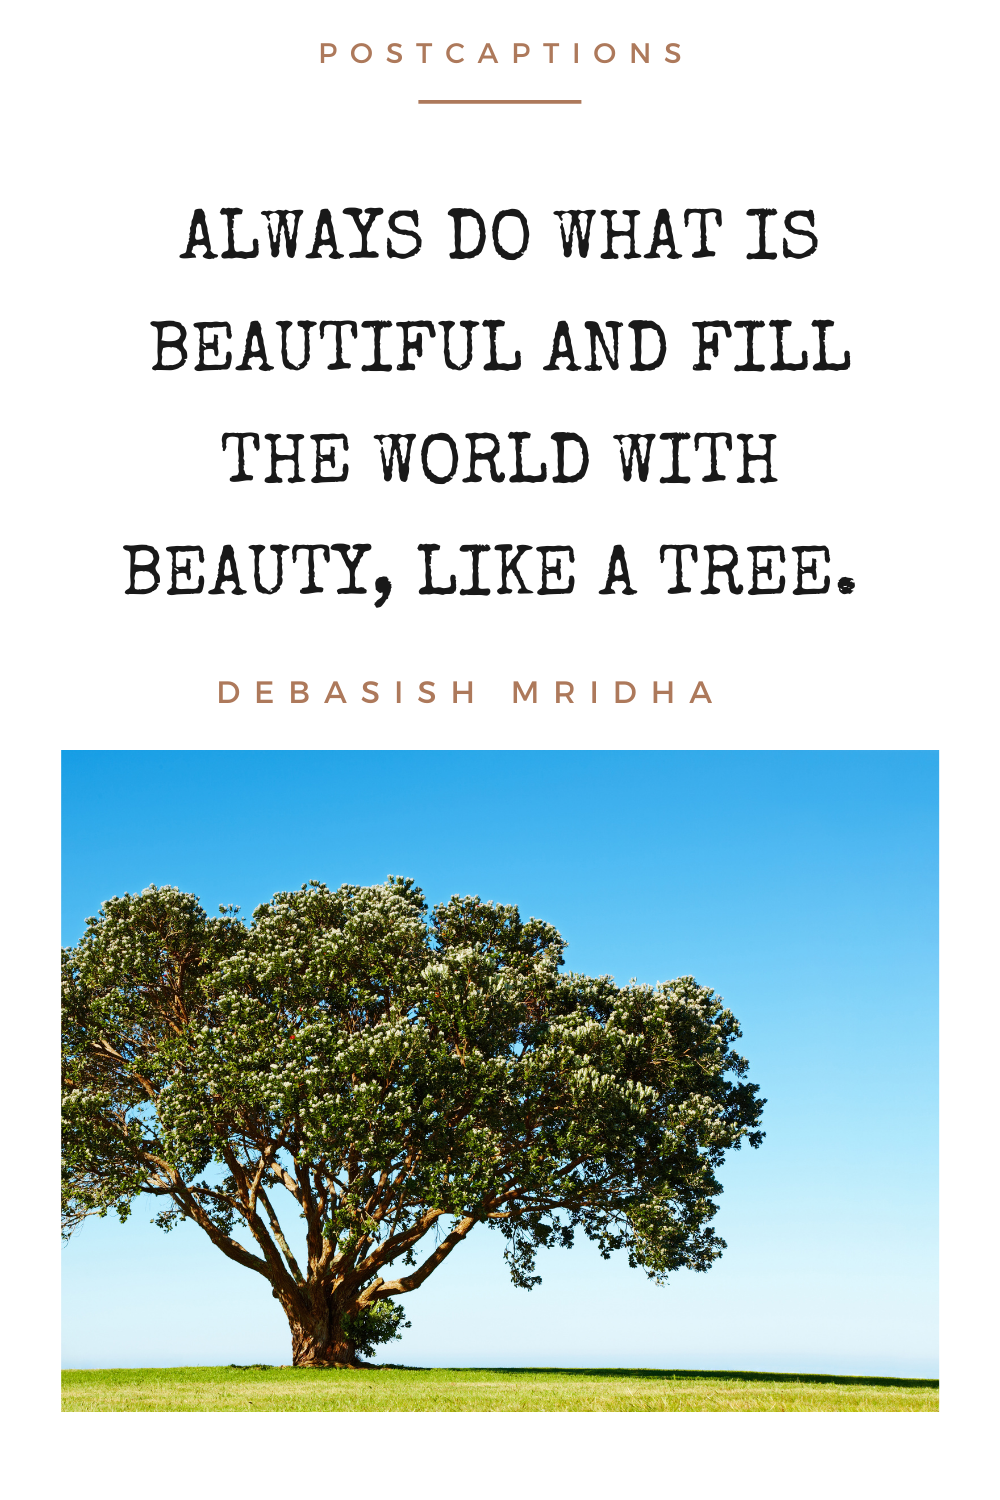 Tree quotes for Instagram